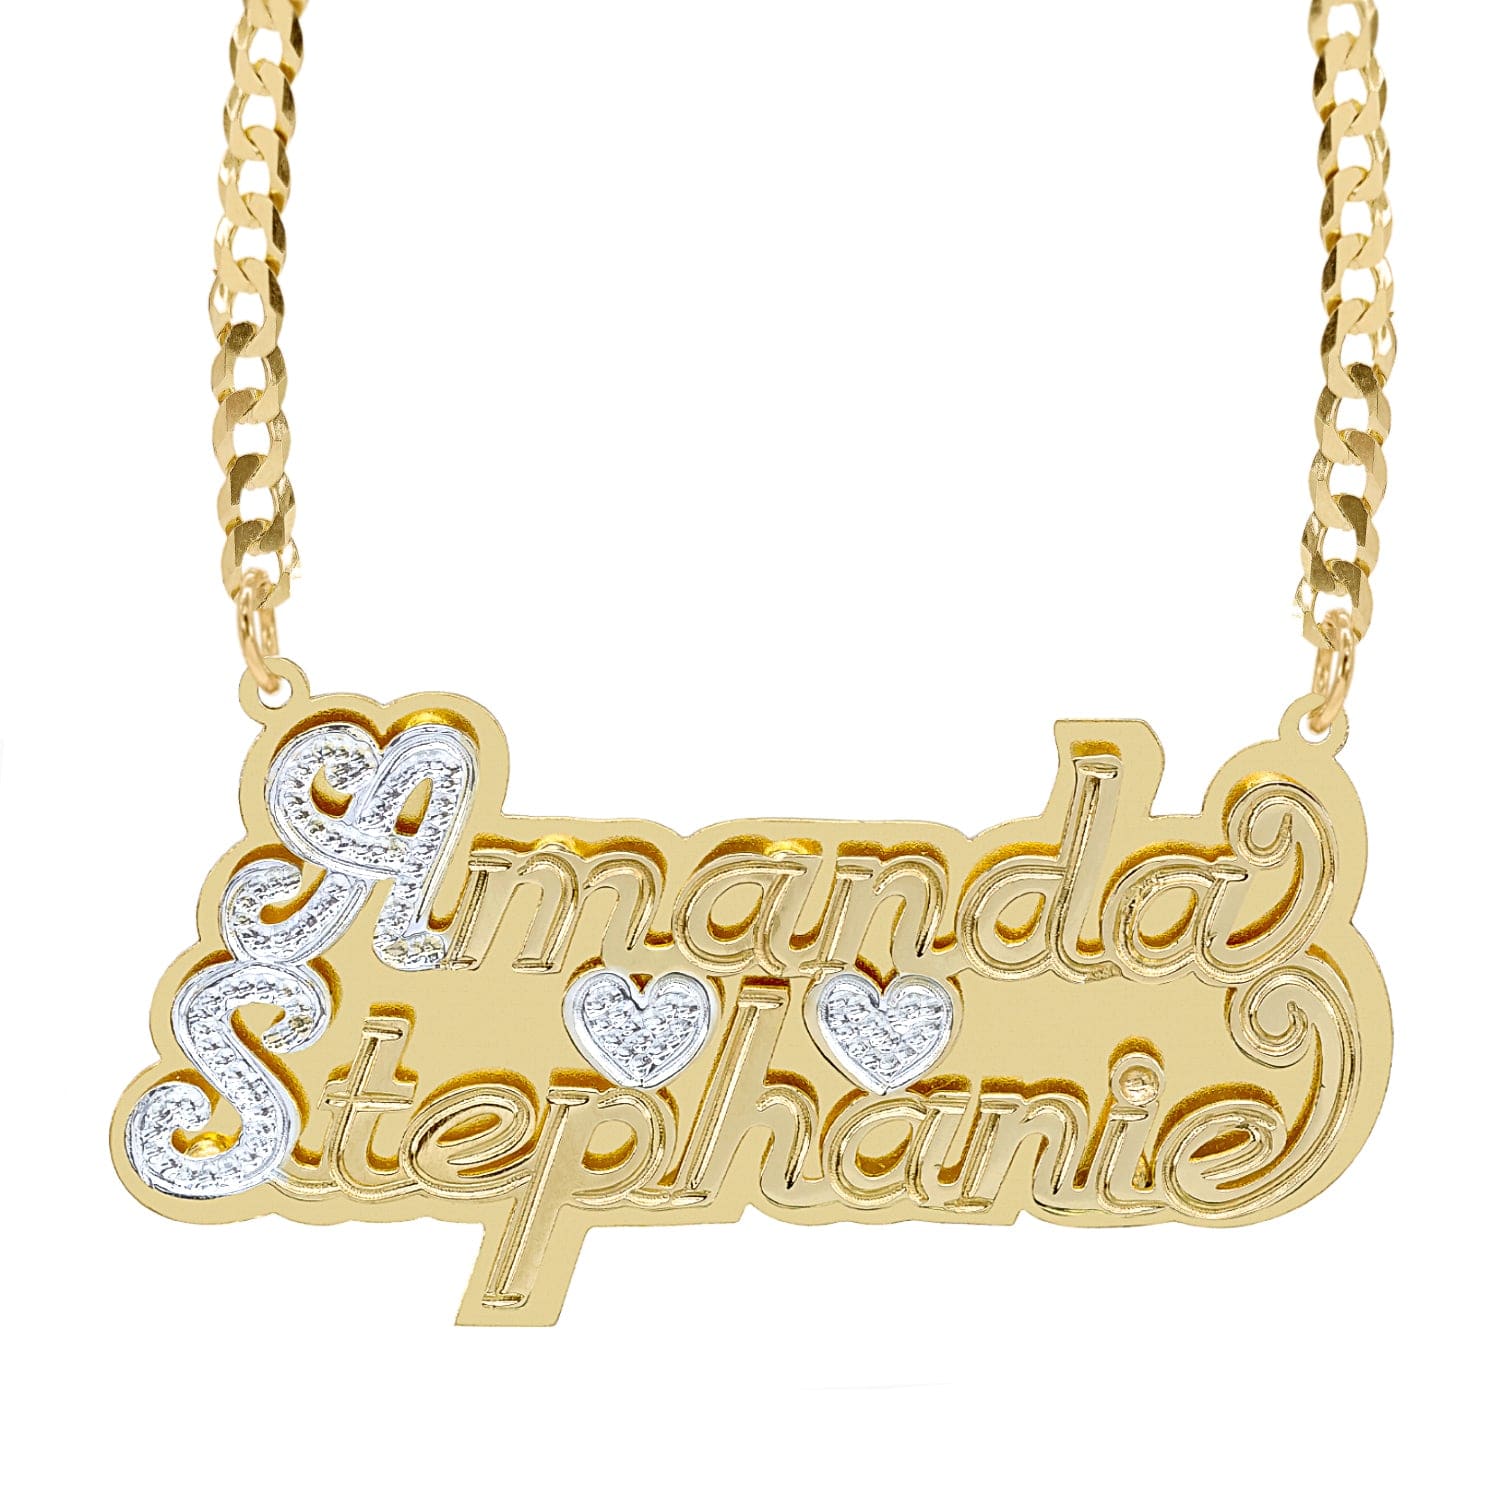 14k Gold over Sterling Silver / Cuban Chain Double Plated Nameplate Necklace "Couples" with Cuban Chain